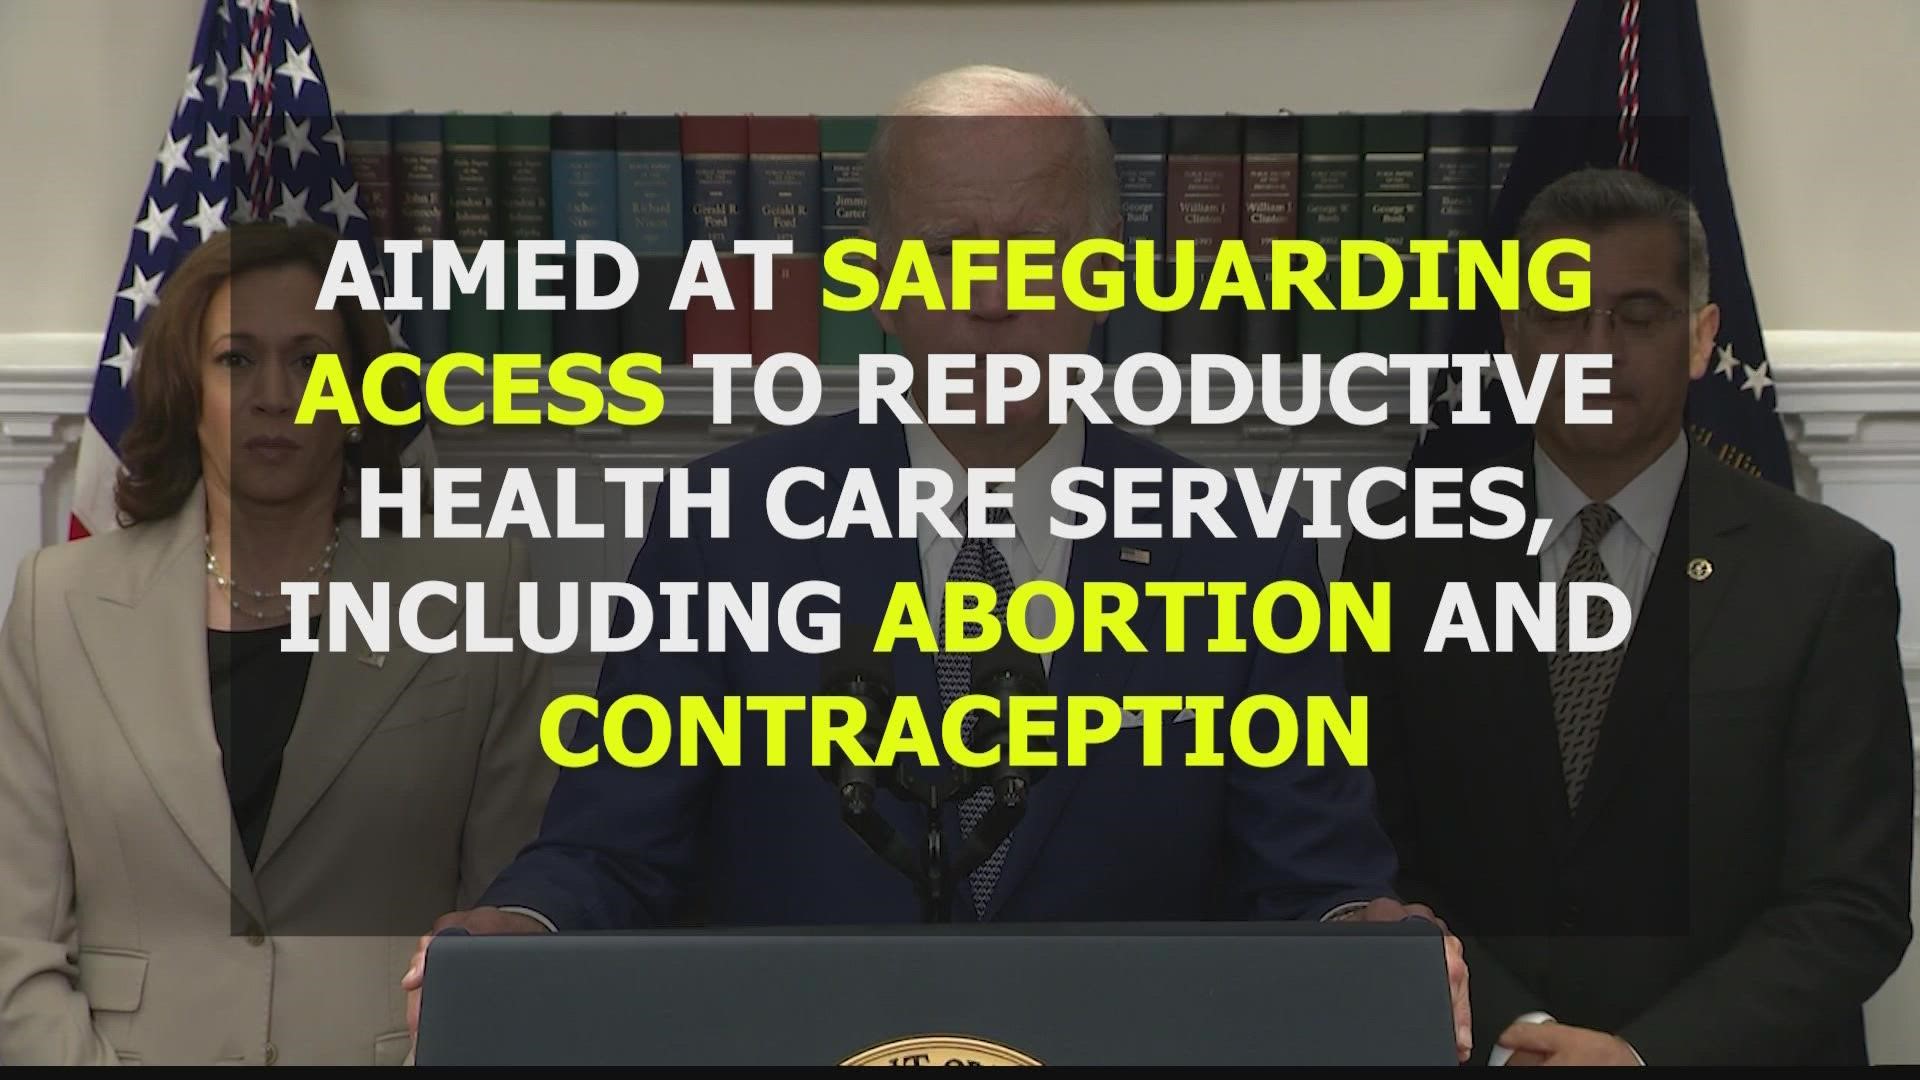 Biden is expected to formalize instructions to the Departments of Justice and Health and Human Services to push back on efforts to limit abortion access.